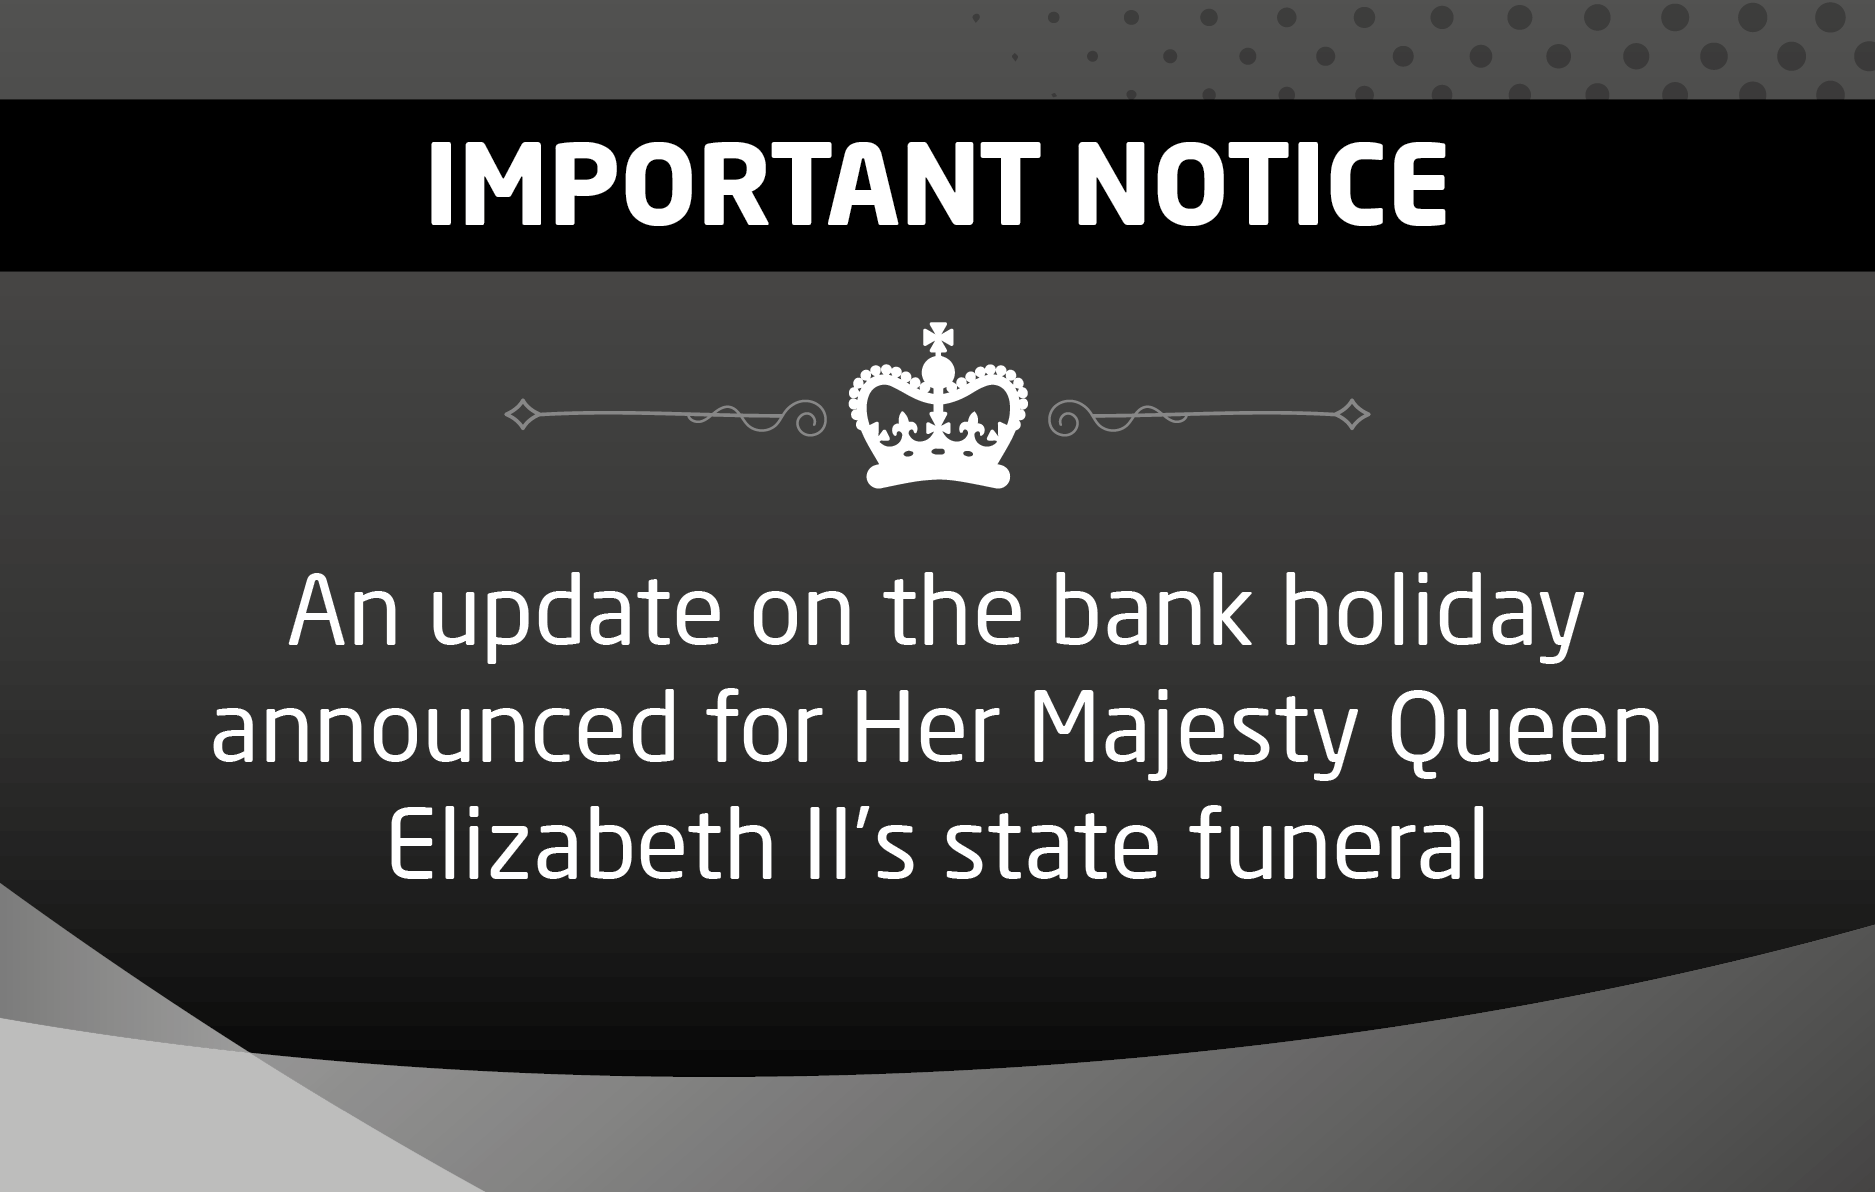 An update on the bank holiday announced for Her Majesty Queen Elizabeth II’s State Funeral